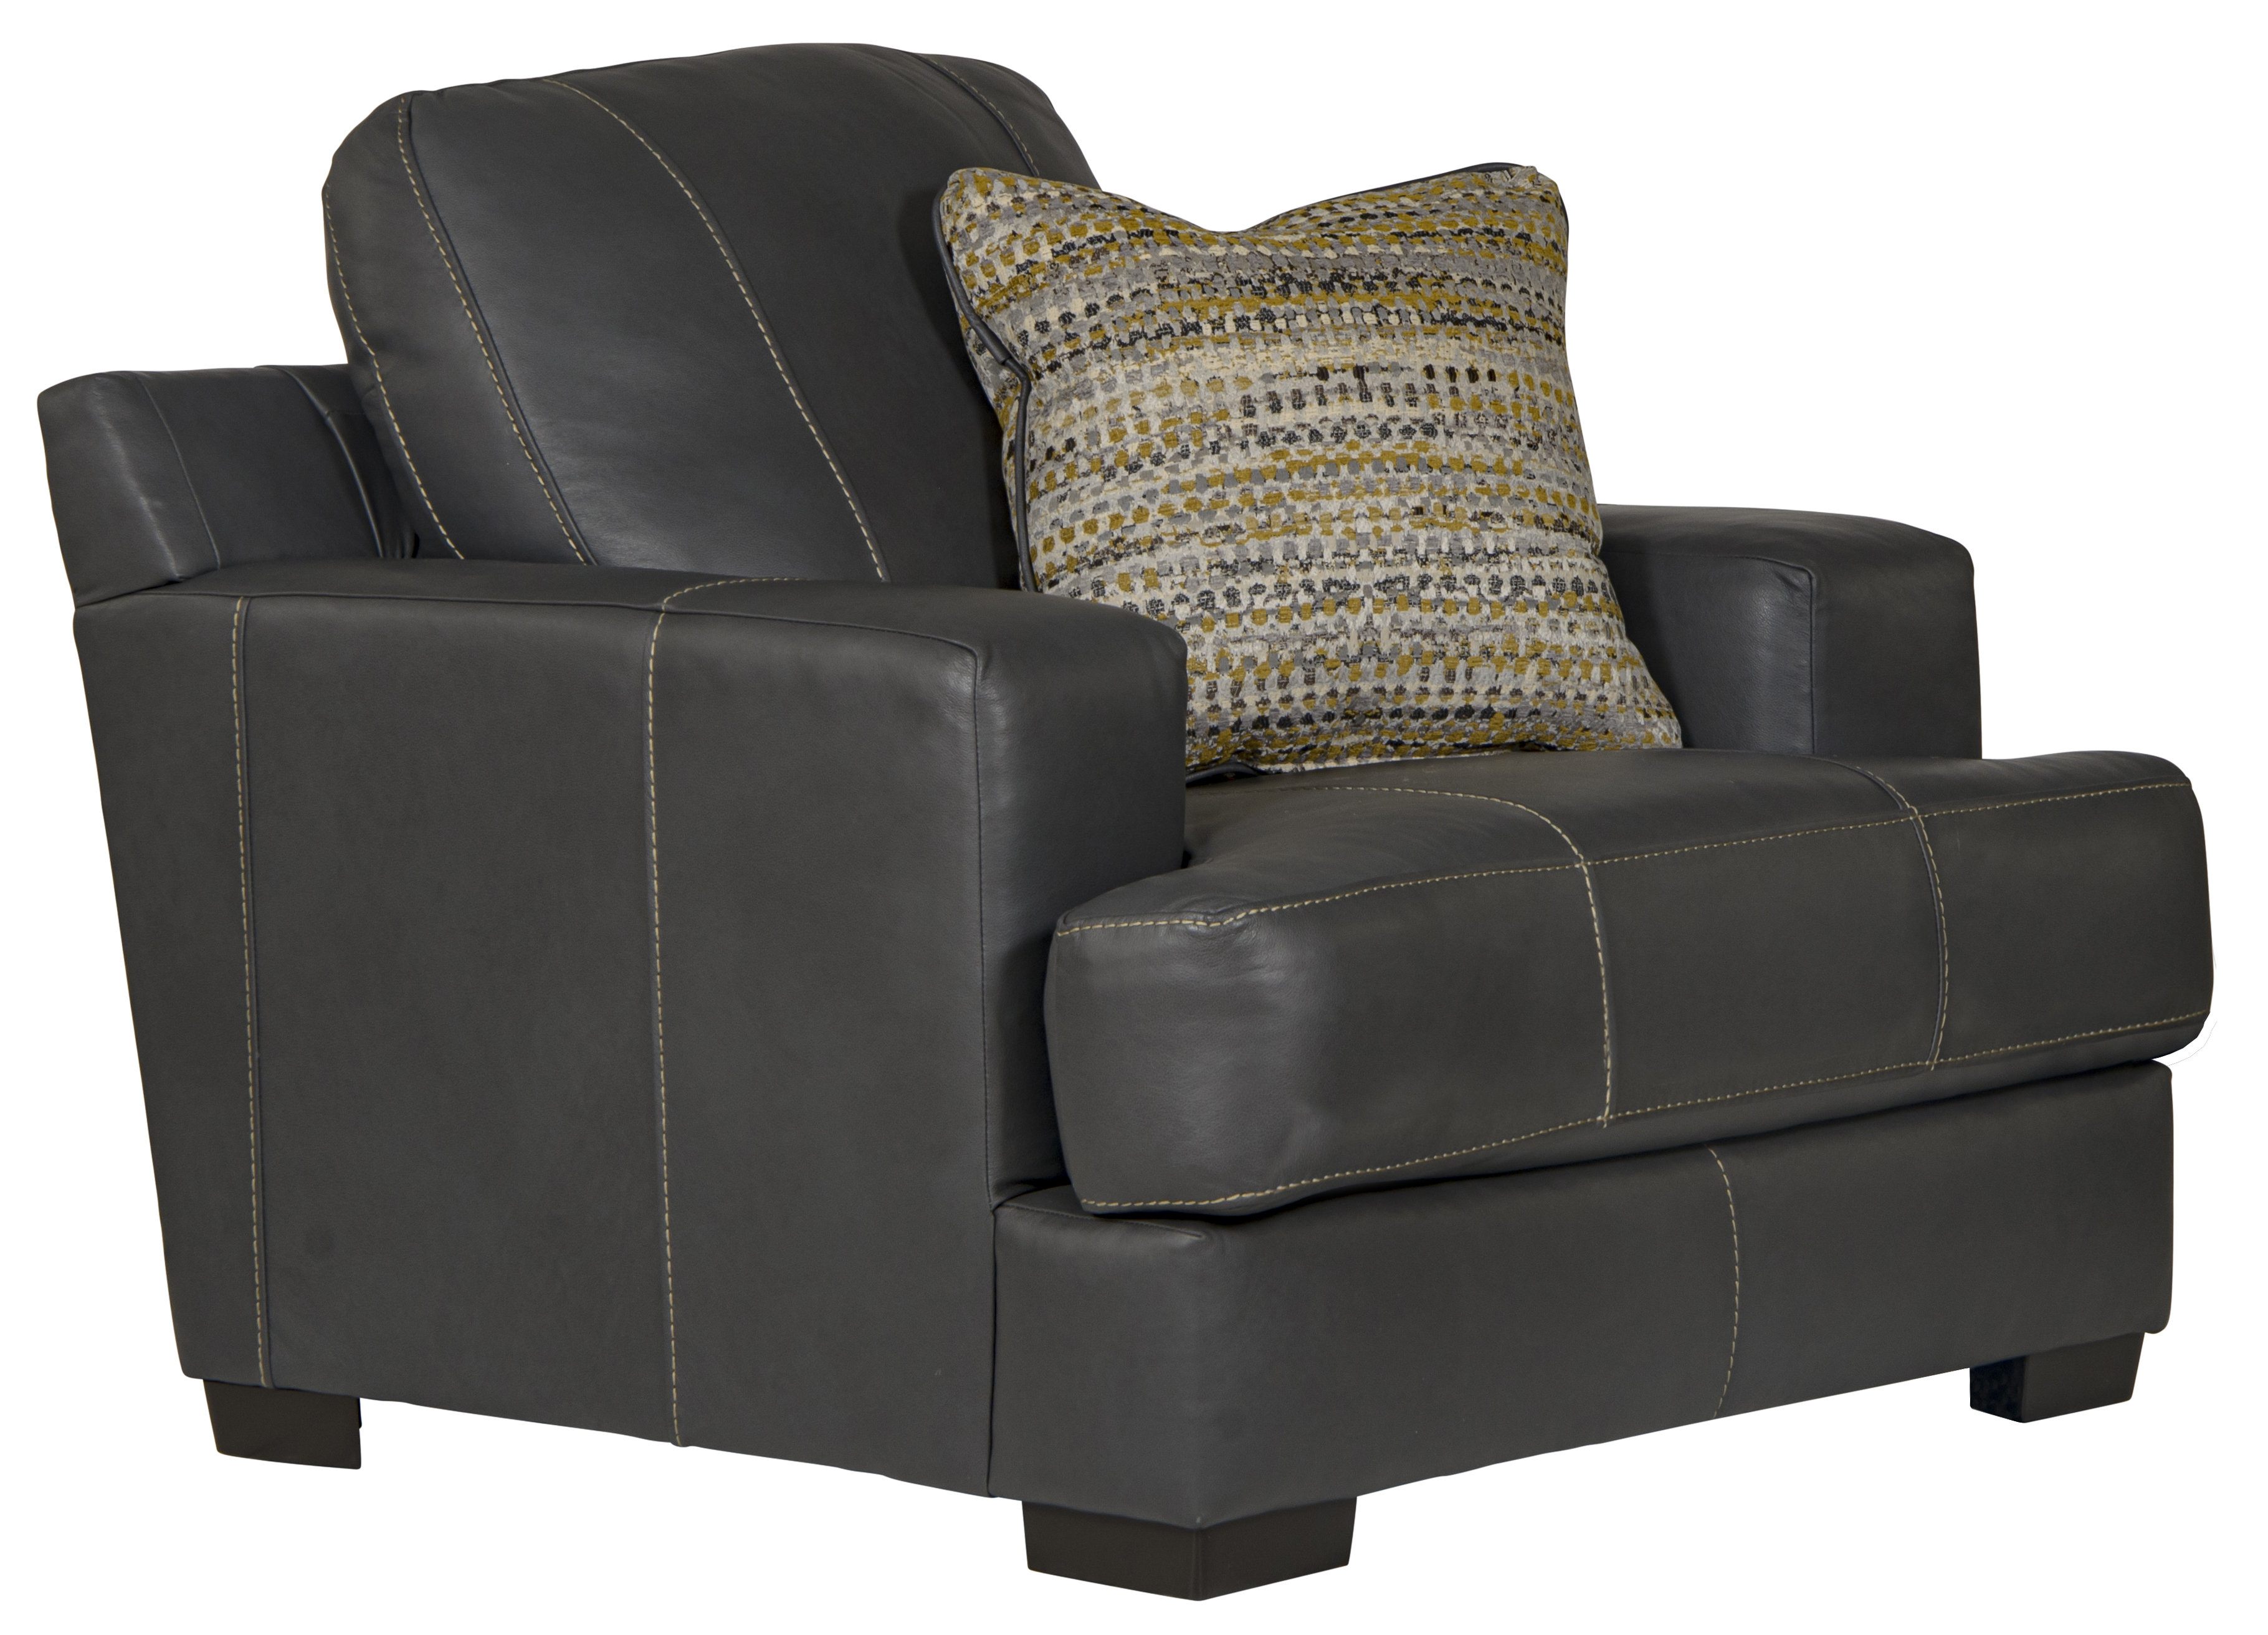 Daryon Leather Club Accent Chair - Luxurious Comfort, Goose Feather Cushion Filling, Square Arm Design Latitude Run